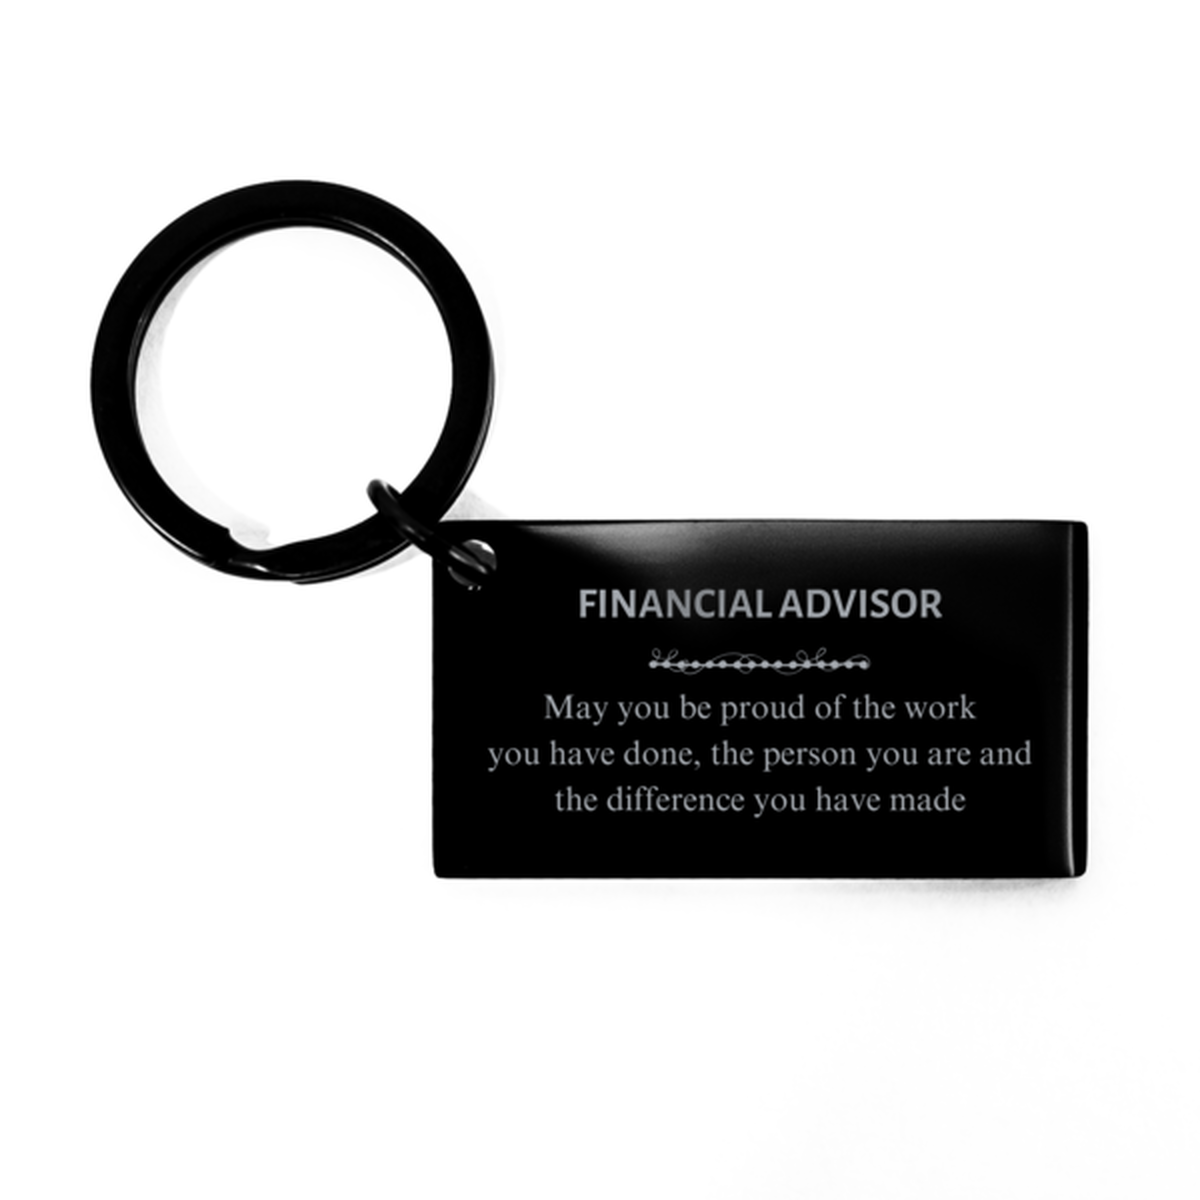 Law Enforcement Officer May you be proud of the work you have done, Retirement Financial Advisor Keychain for Colleague Appreciation Gifts Amazing for Financial Advisor